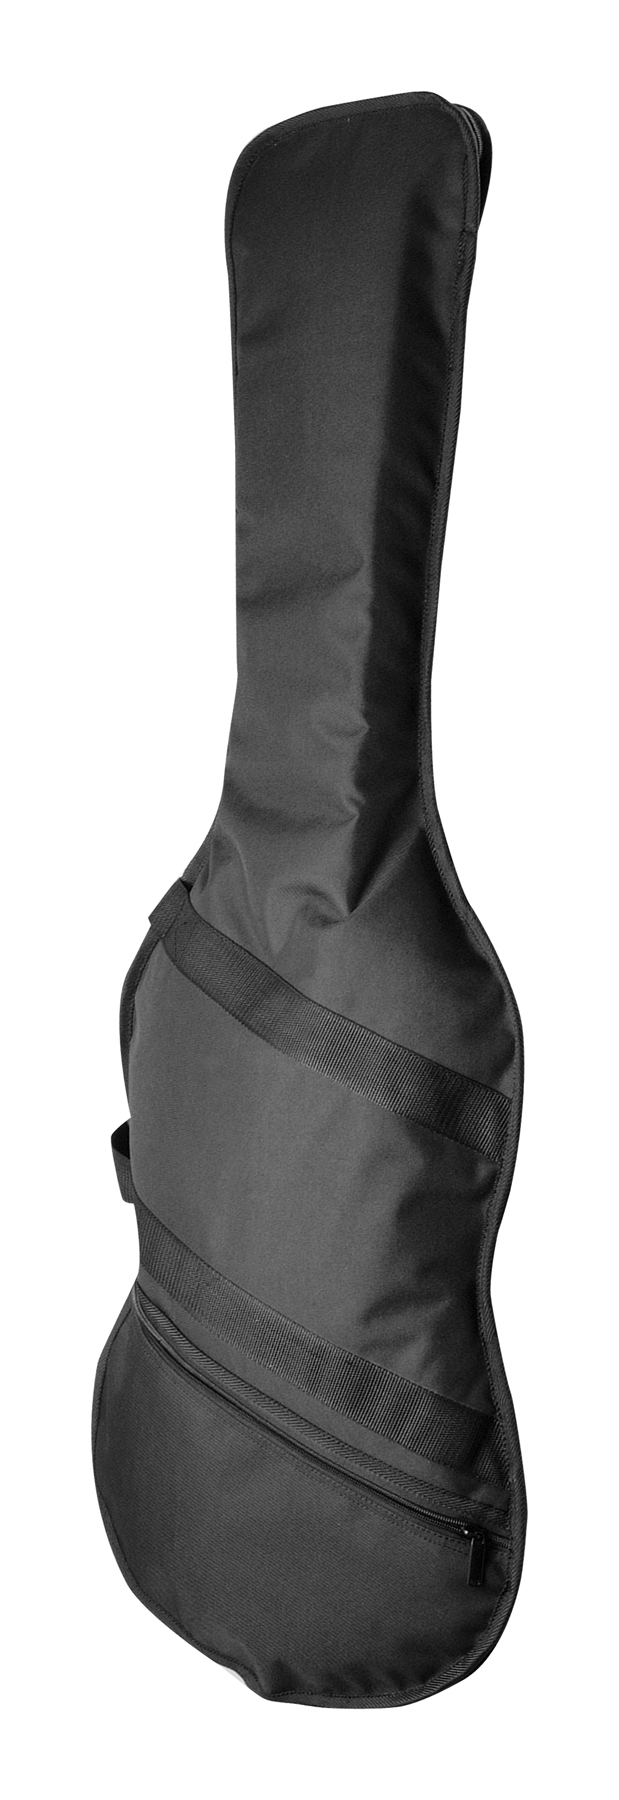 On-Stage On-Stage GBE4550 Bag for Electric Guitar